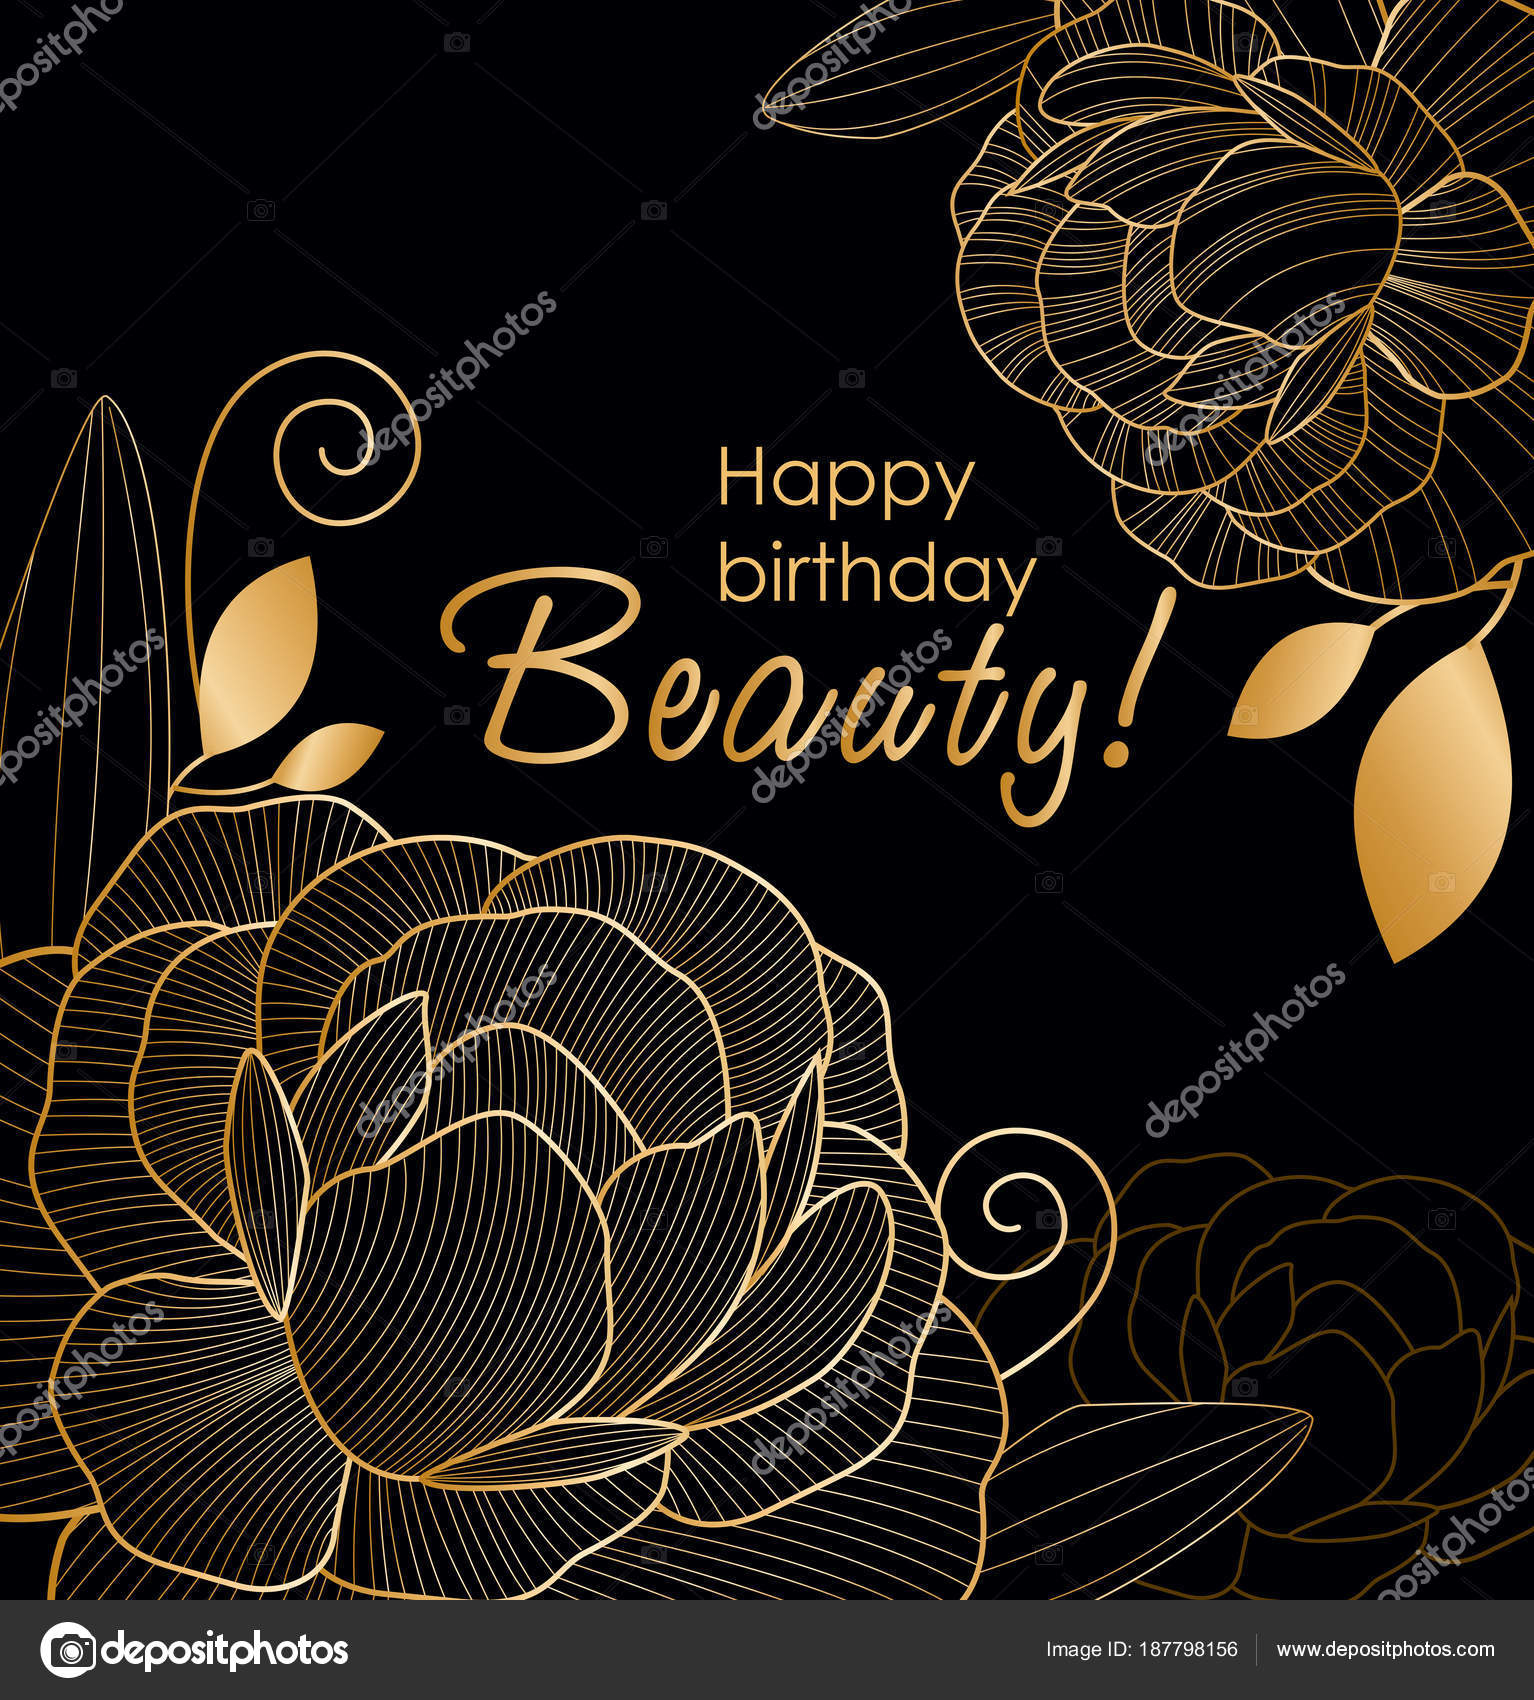 Happy Birthday 8x6.5ft Polyester Photography Background Luxurious Golden Royal Crown Art Design Flowers Decros Corner Black Backdrops Birthday Party Banner Studio Photo Props 